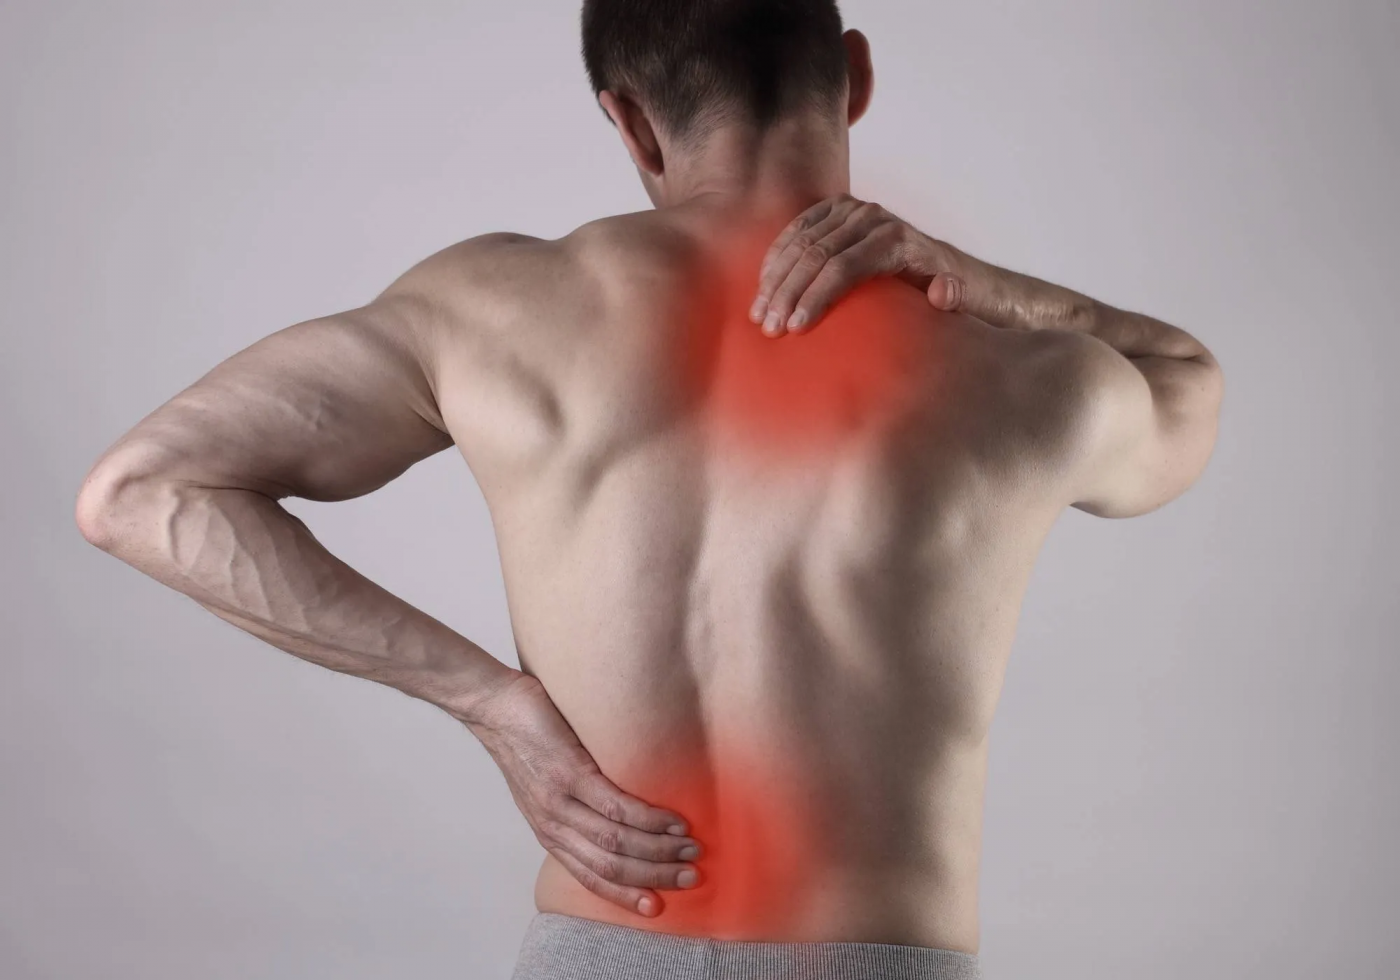 Muscular And Skeletal Pain All That Can Be Done To Get Rid Of It